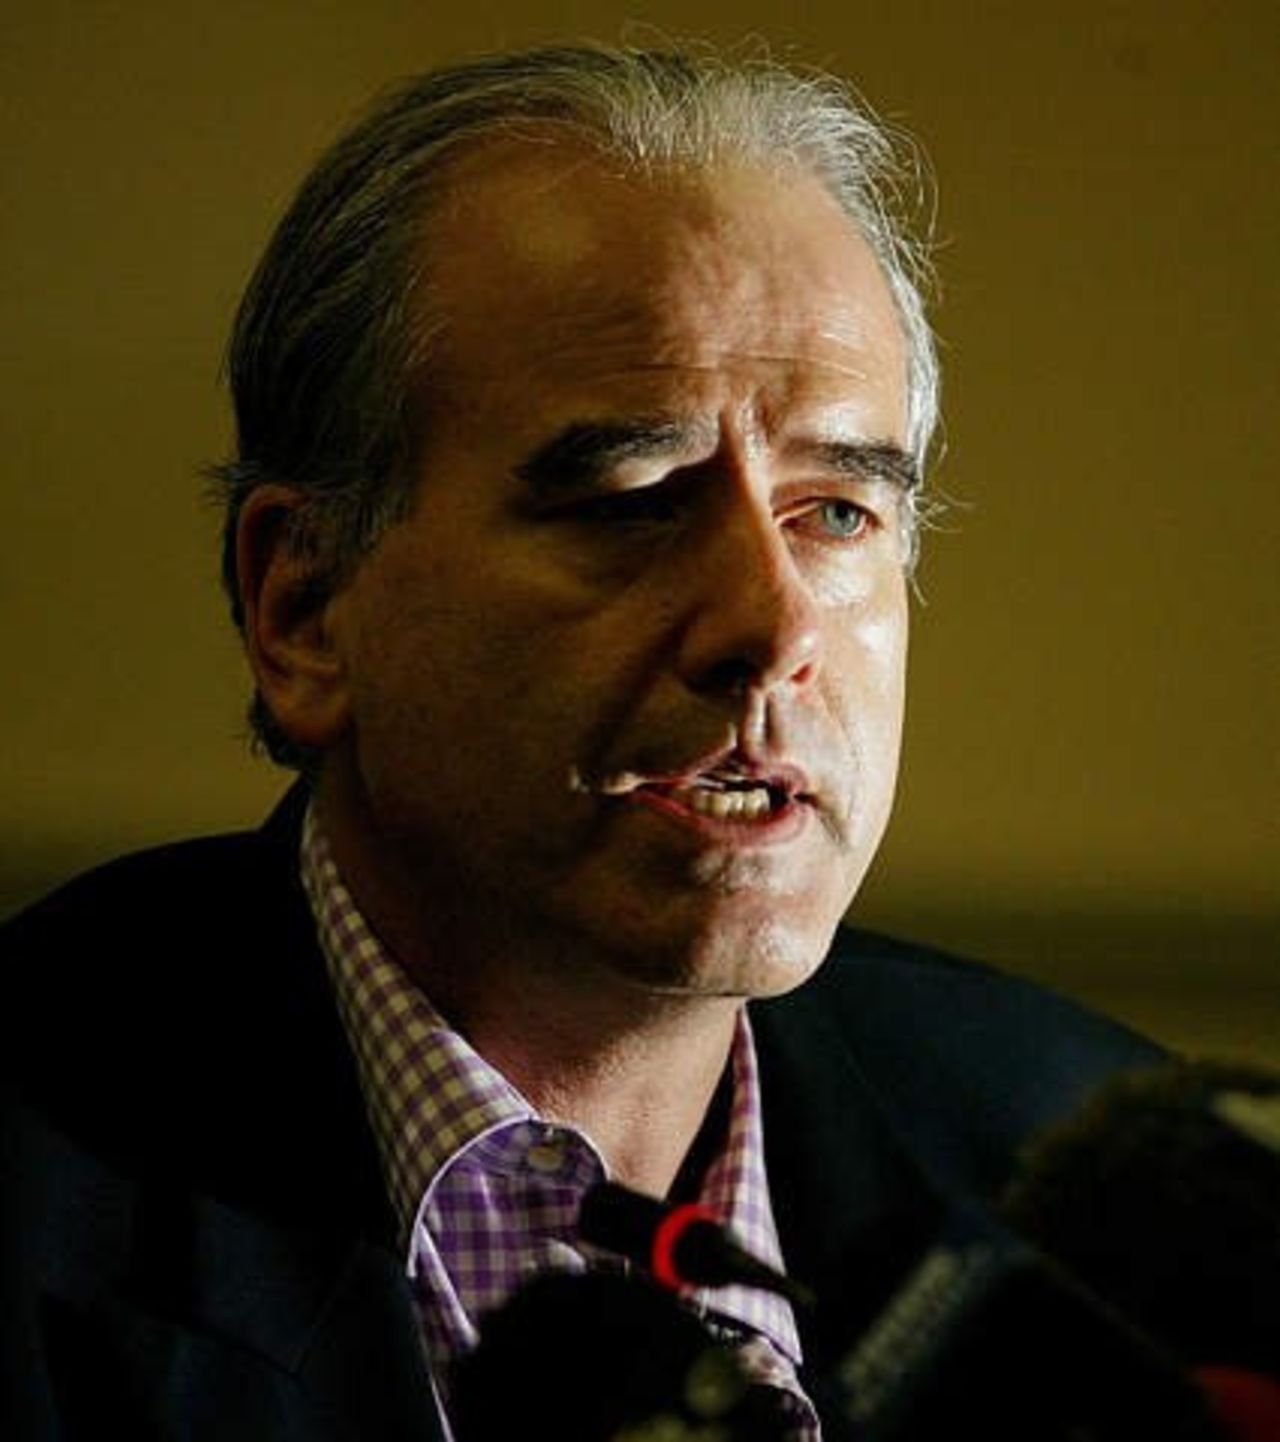 Tim Lamb speaks during a news conference in Cape Town about the controversial Cricket World Cup Zimbabwe fixture (Sun 9 Feb 2003)